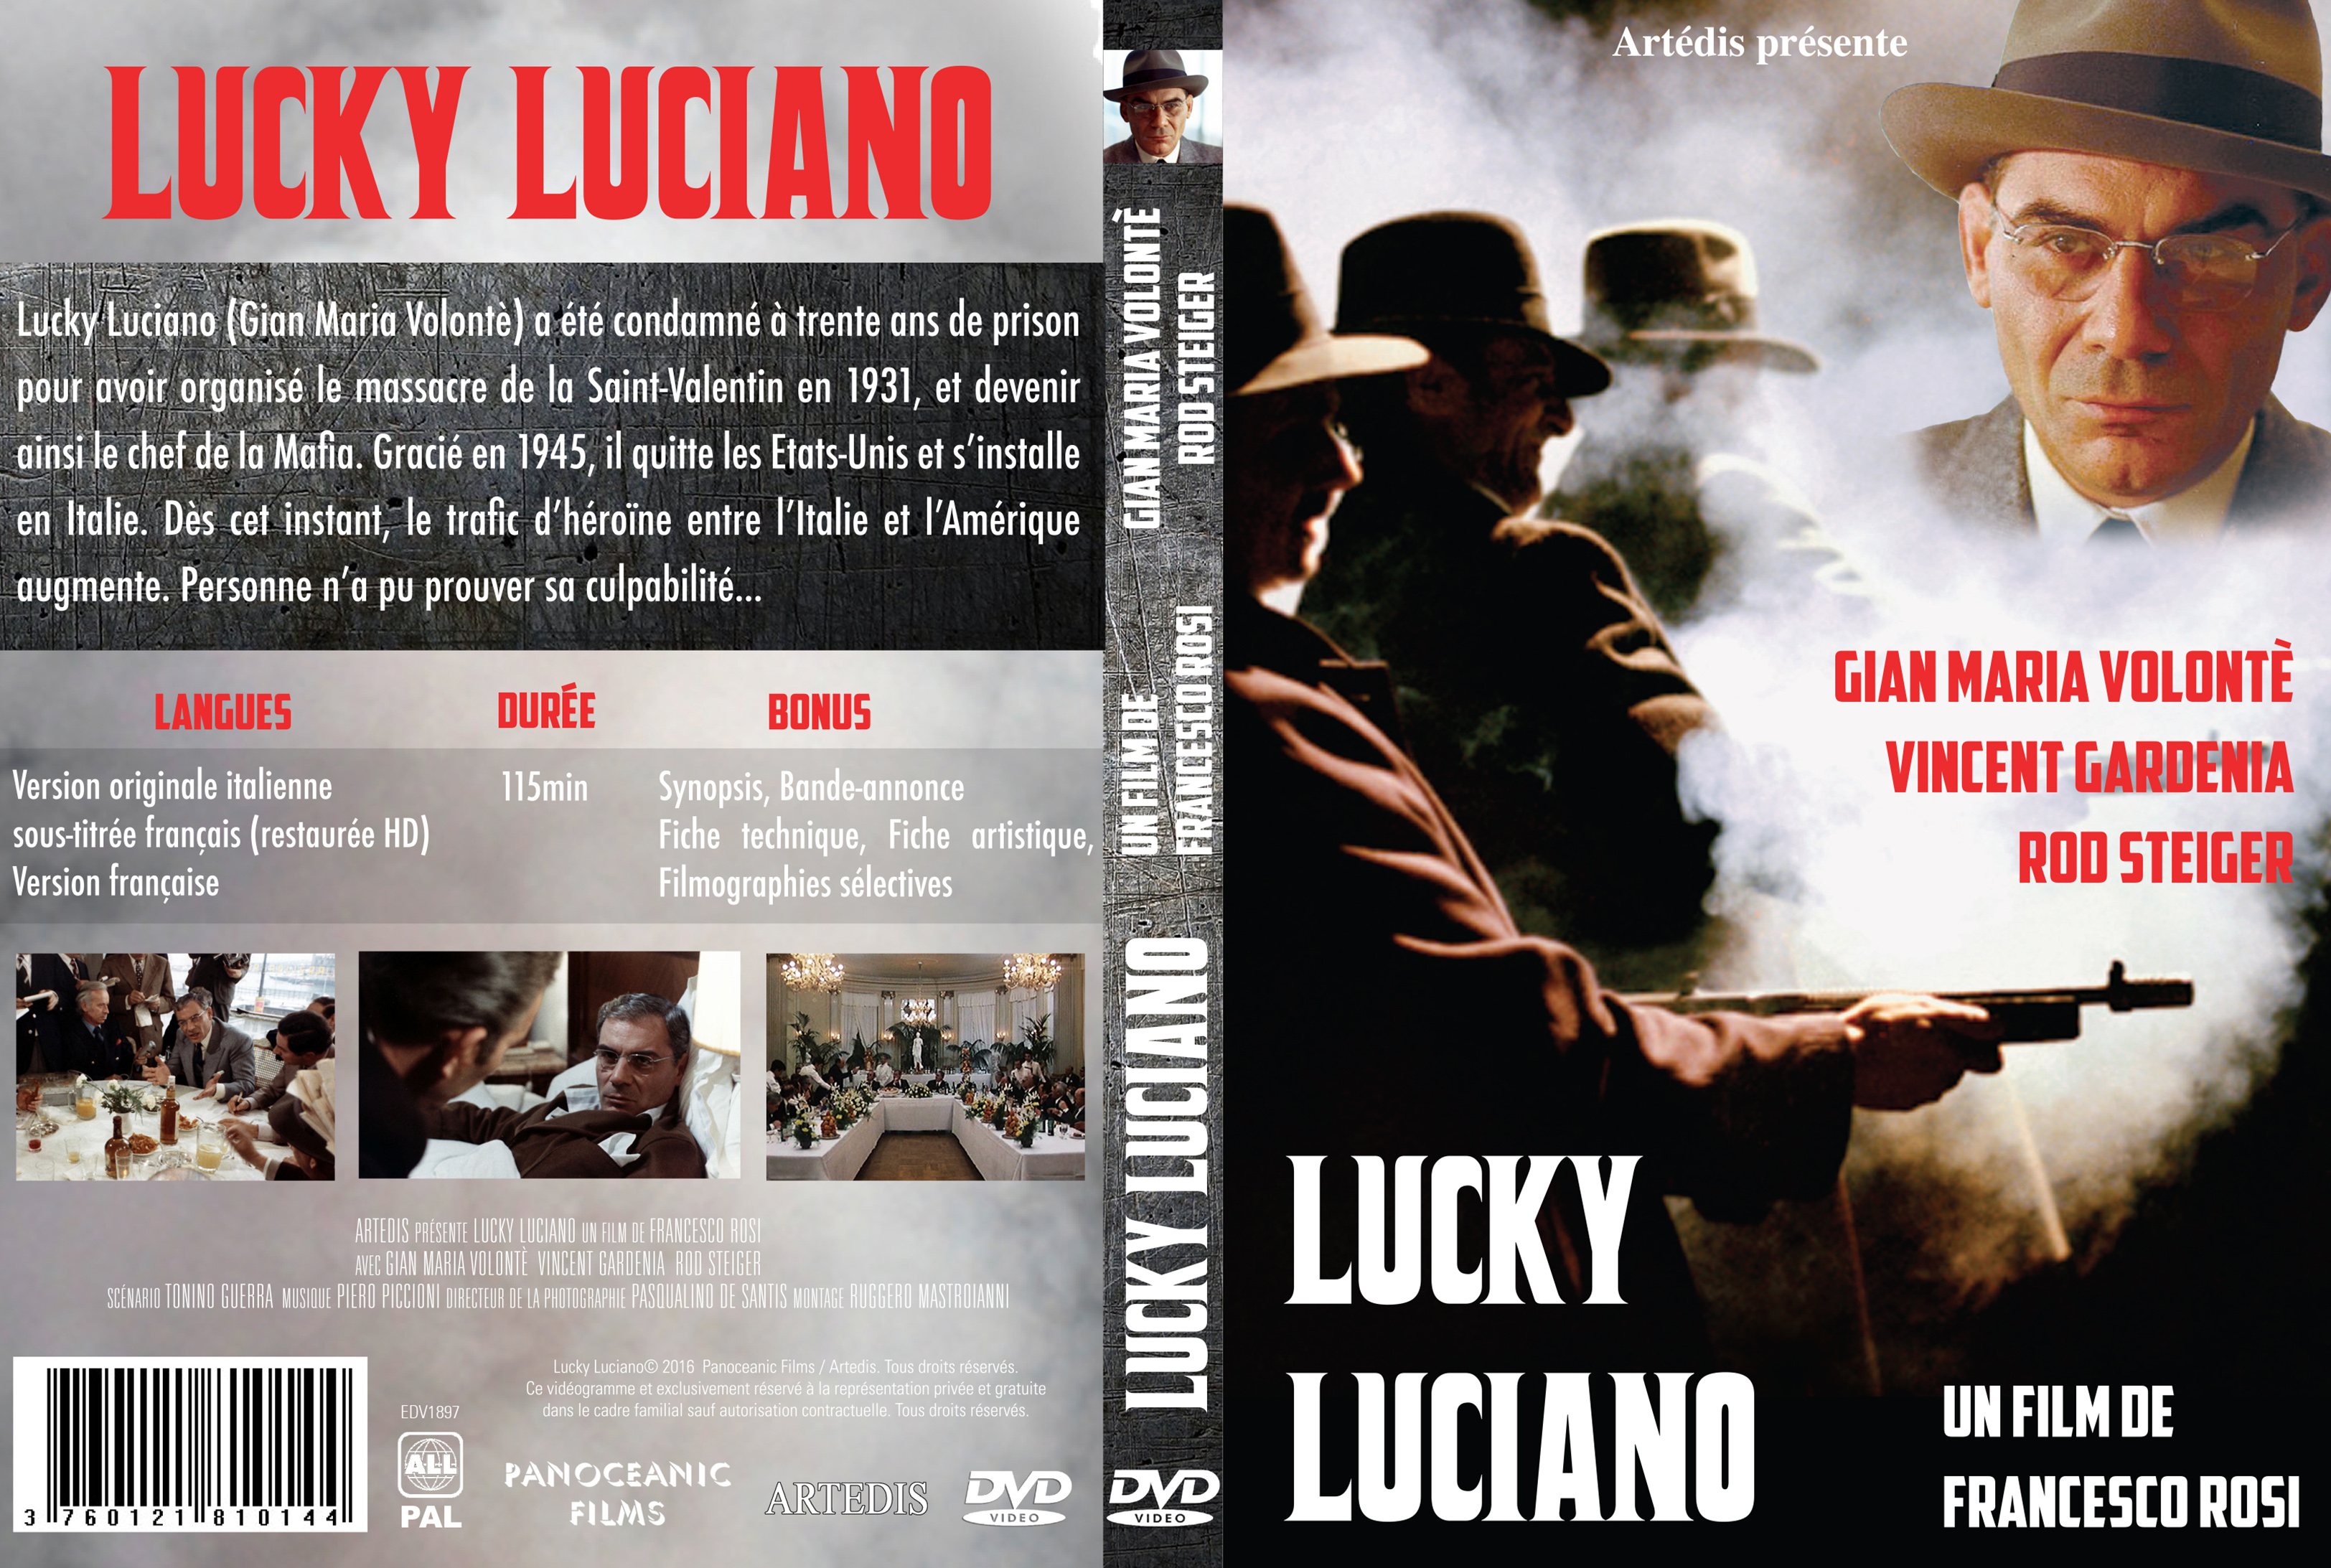 Jaquette DVD Lucky Luciano v2